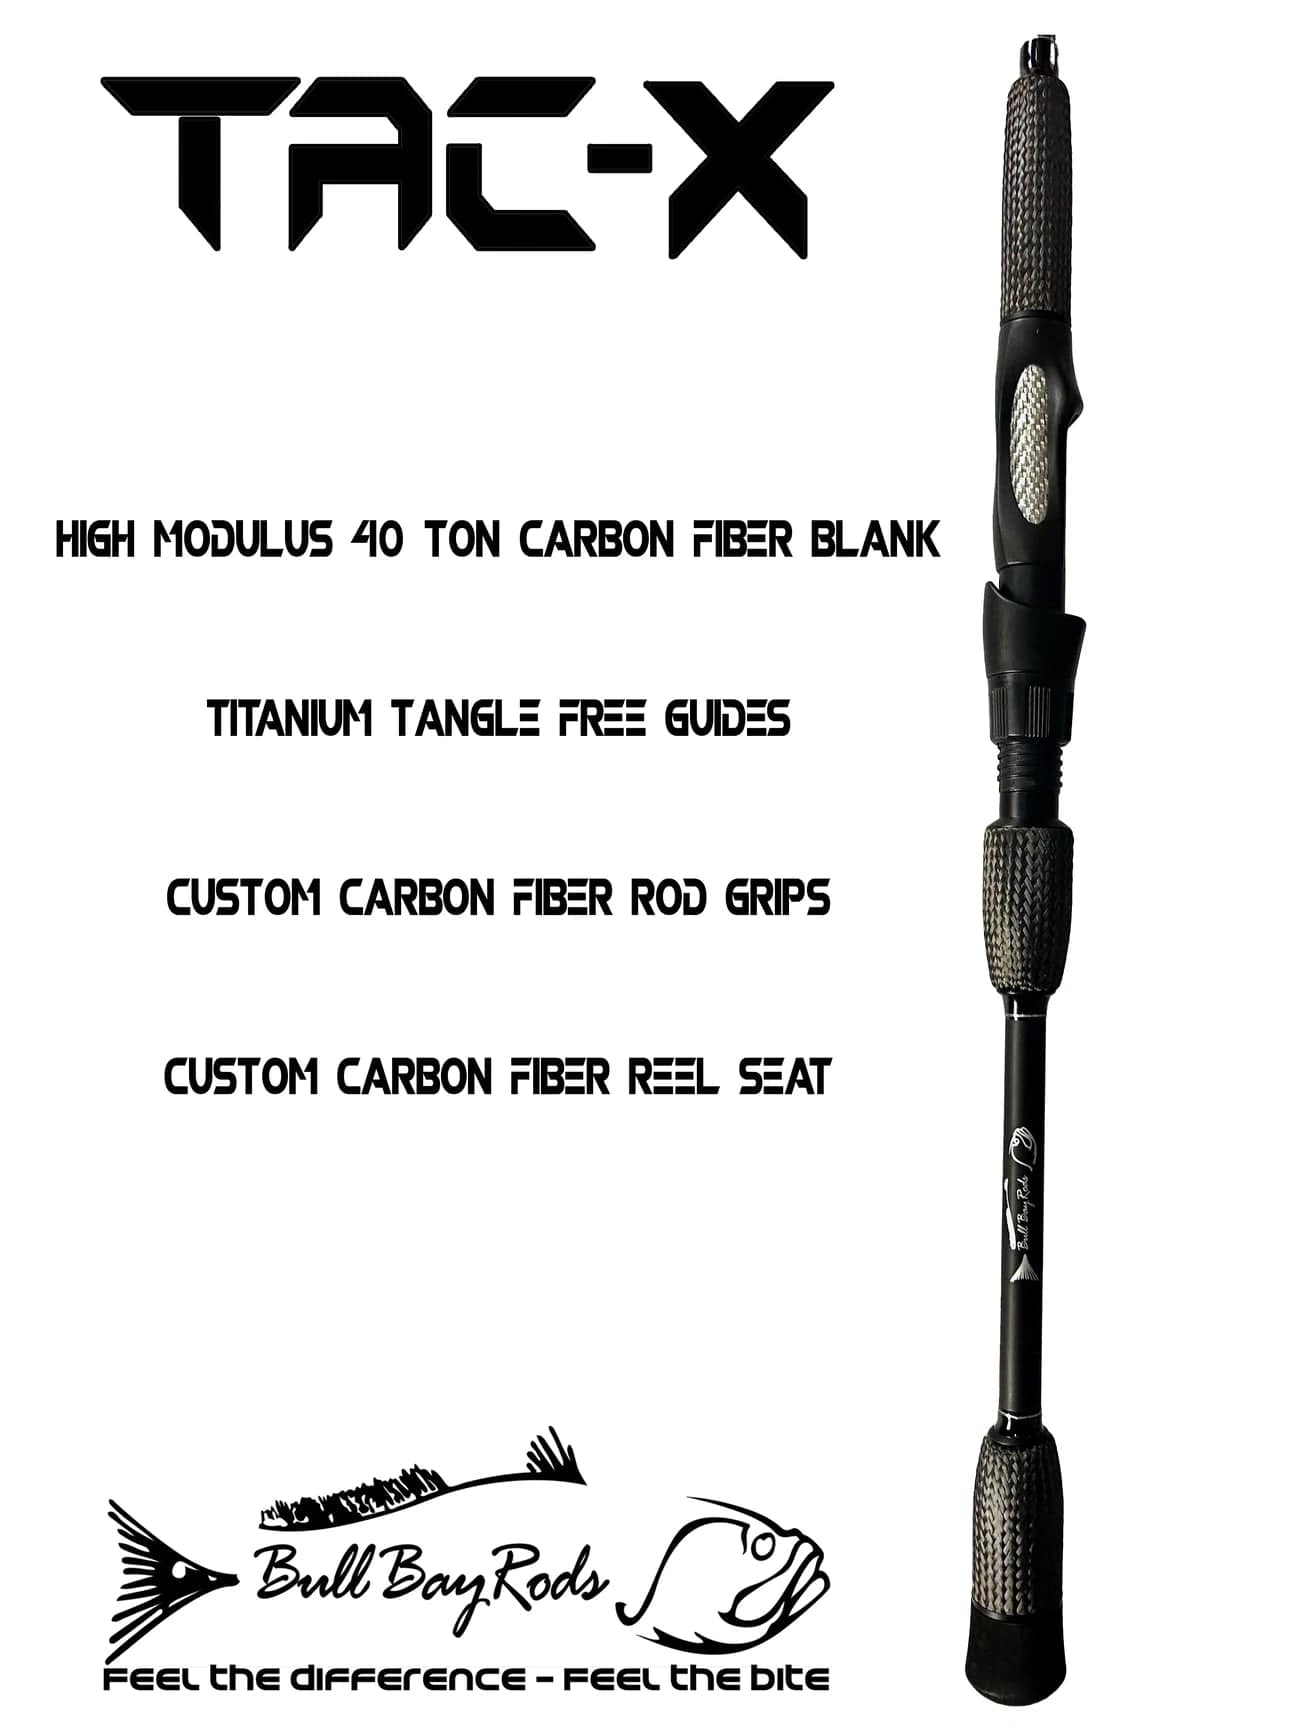 Find More Fishing Rods Information about High Carbon Saltwater